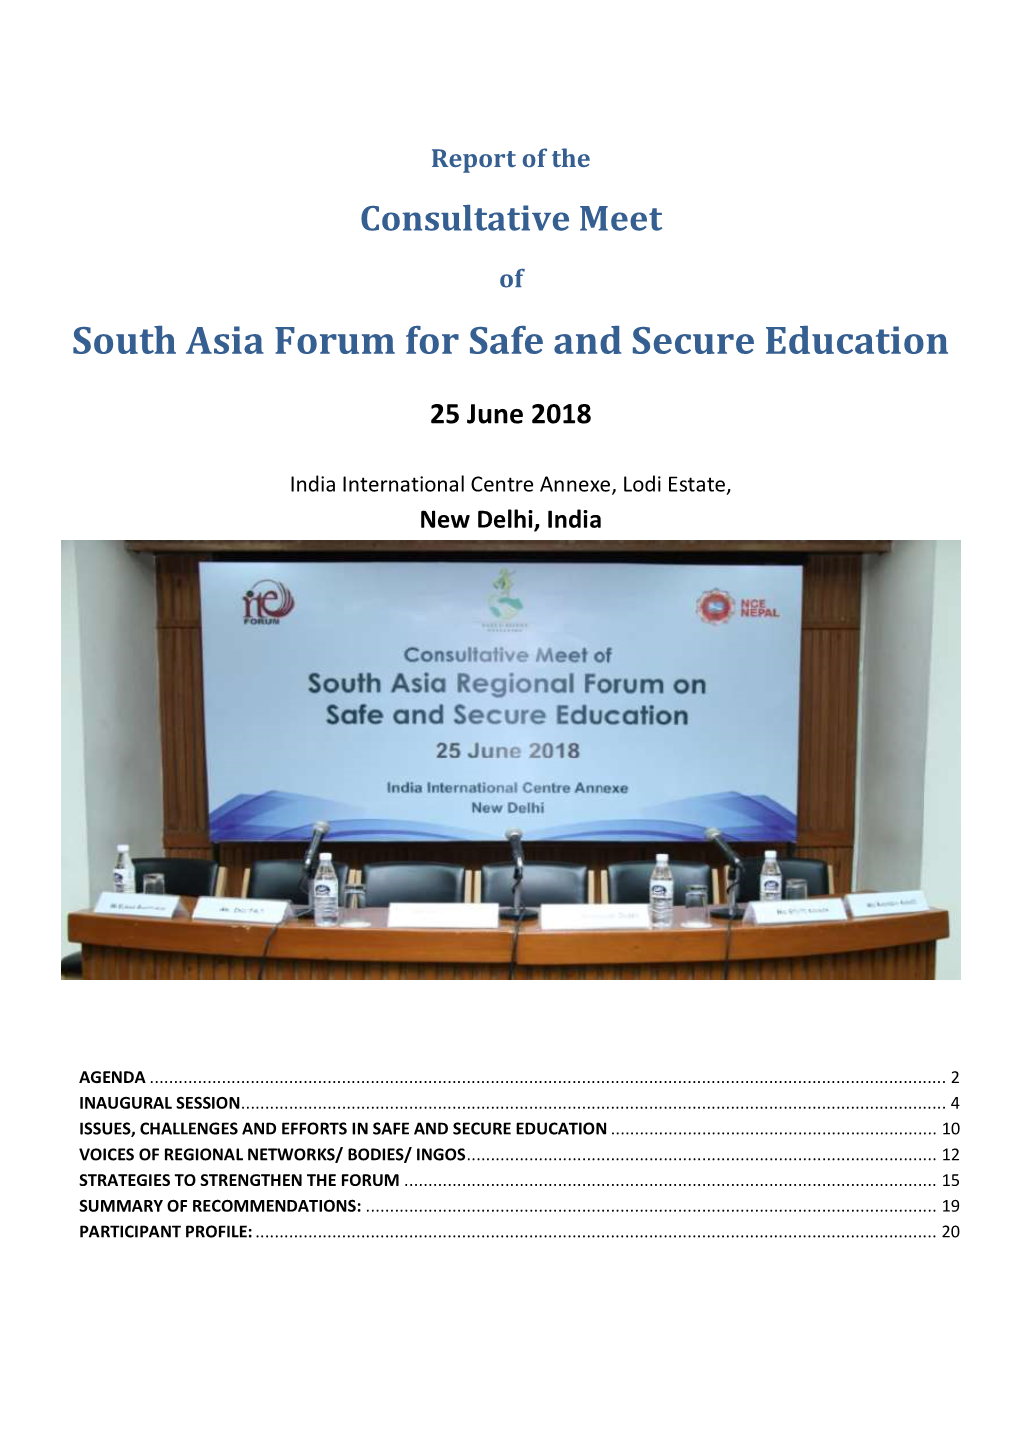 Consultative Meet of South Asia Forum for Safe and Secure Education, 25 June 2018